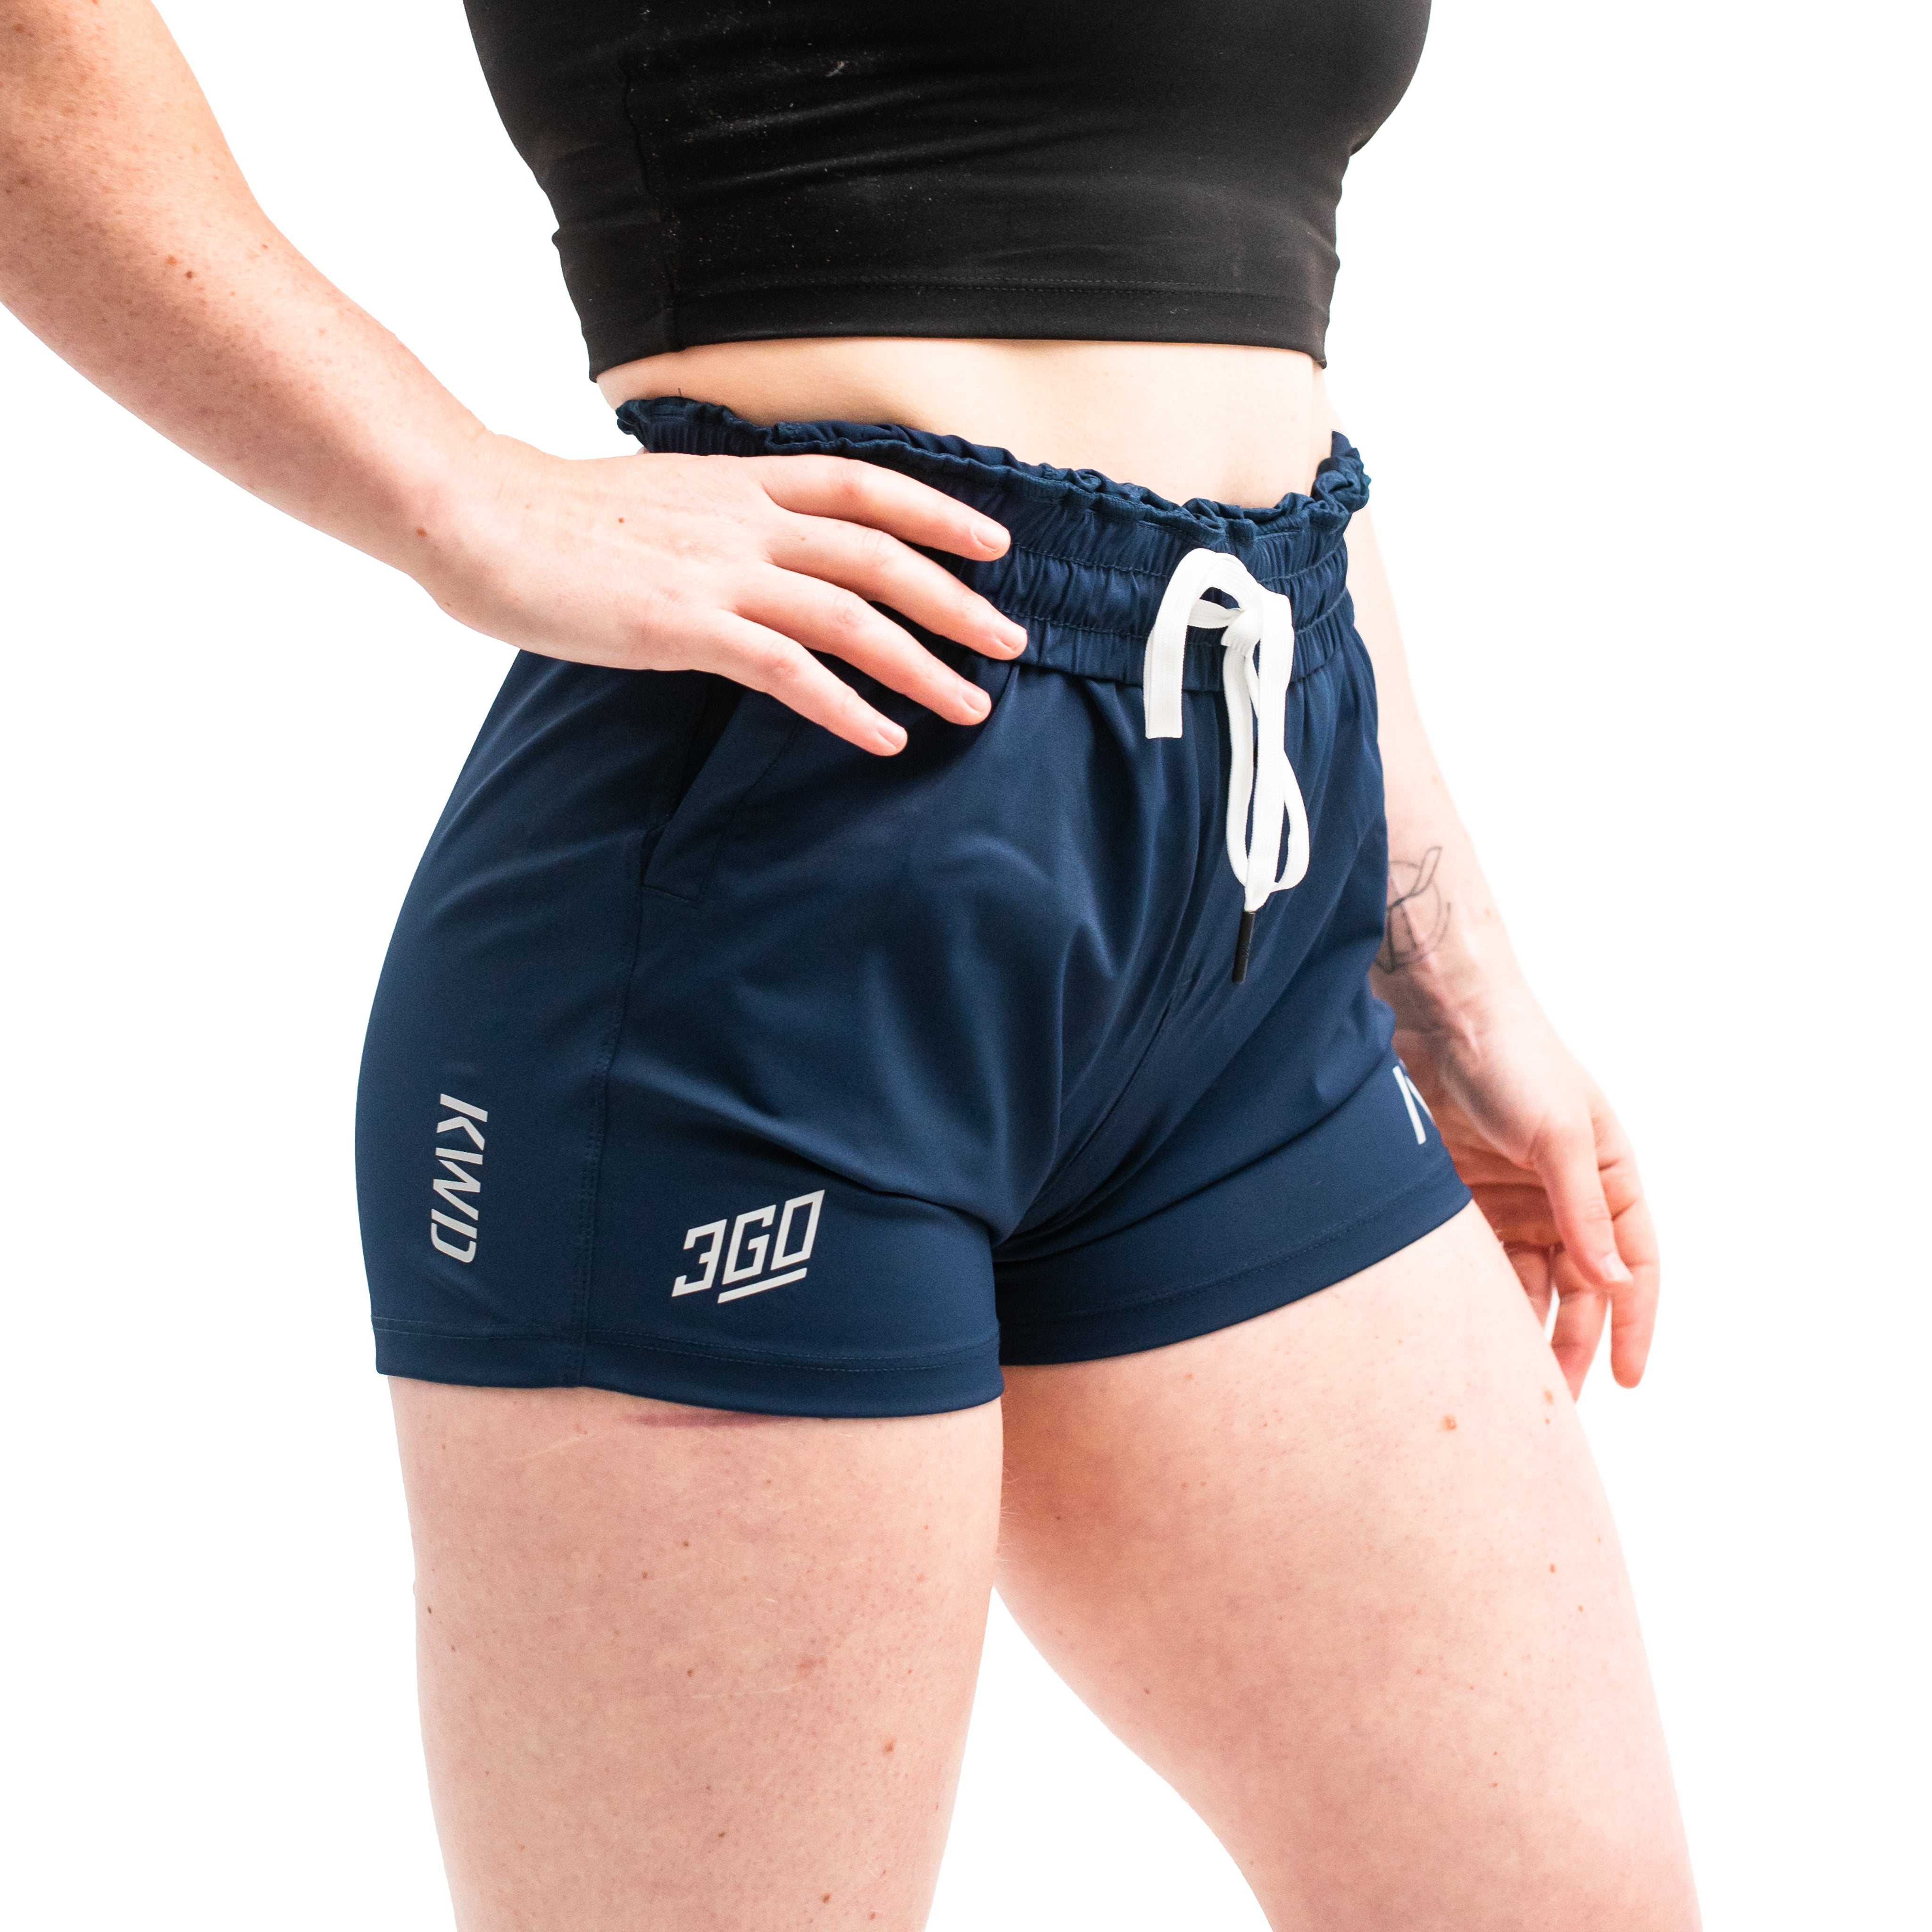 Varsity 360-GO KWD shorts were created to provide the flexibility for all the movements in your training while offering the comfort and fit you have come to love through our KWD shorts. Purchase 360-GO KWD shorts from A7 UK and A7 Europe. 360-GO KWD shorts are the perfect shorts for powerlifting and weightlifting training. Available in UK and Europe including France, Italy, Germany, the Netherlands, Sweden and Poland.